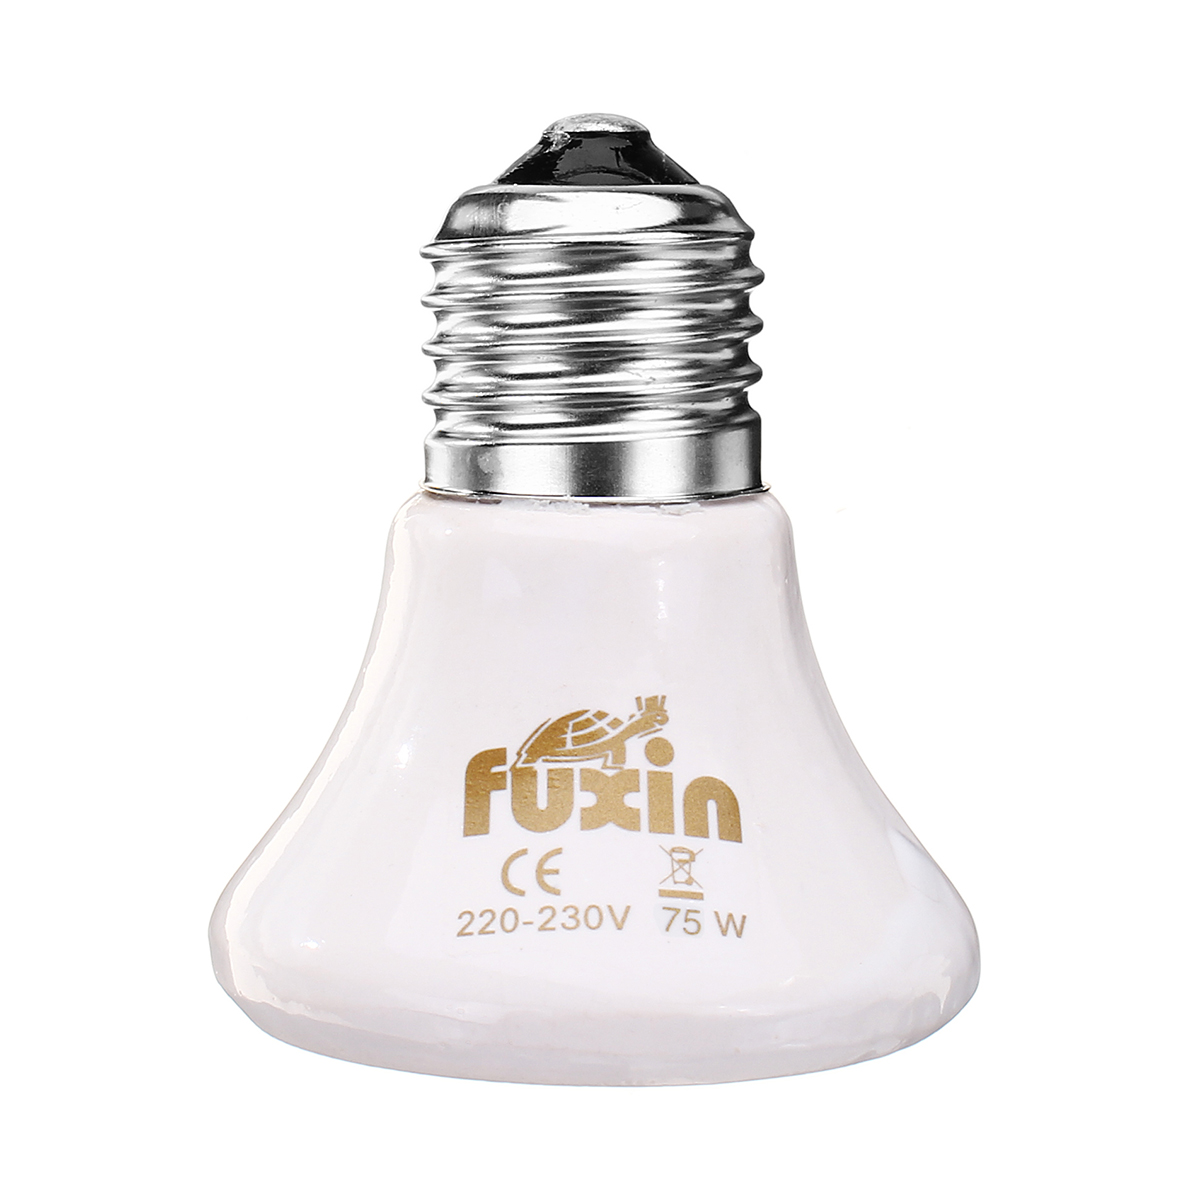 75W-Infrared-Ceramic-Emitter-Heat-E27-Light-Bulb-Reptile-Pet-Brooder-With-Switch-Cover-AC110-AC220V-1308334-4